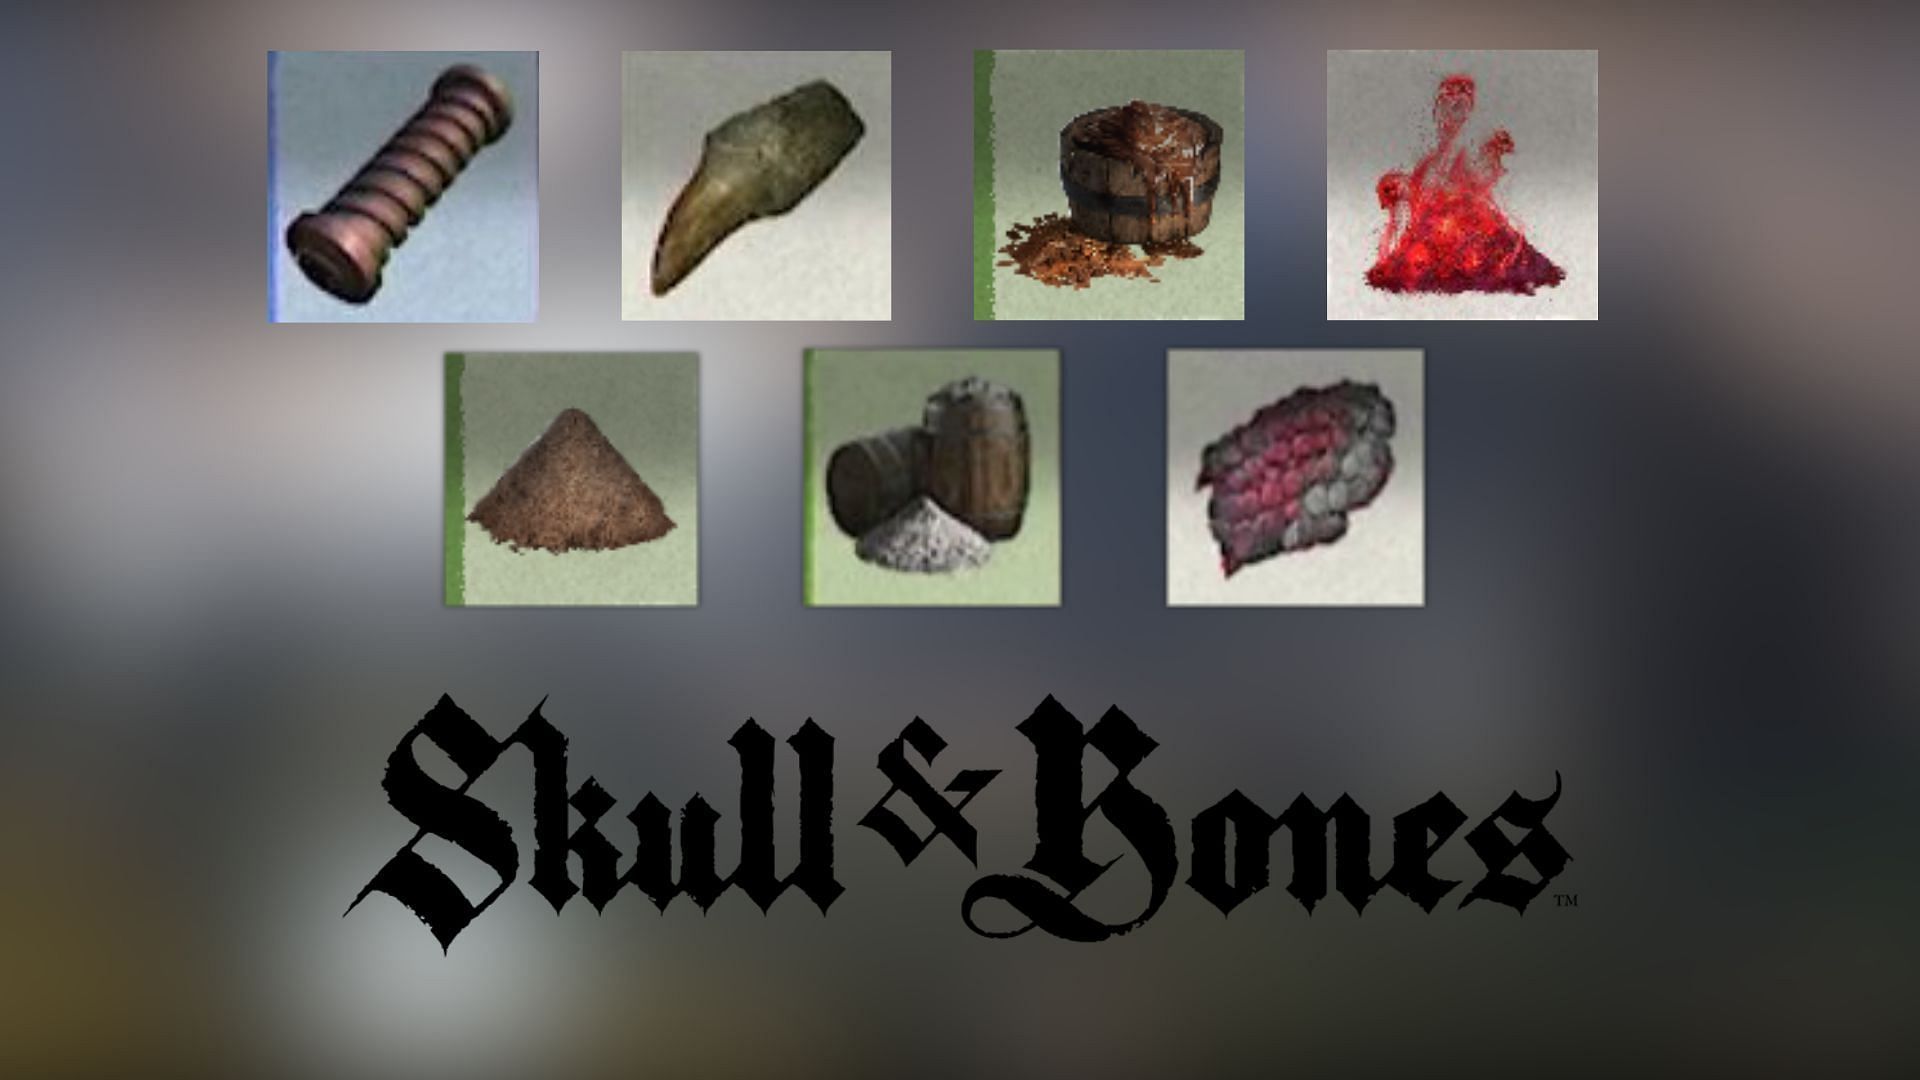 You can find Specialized Material in Skulls and Bones through Settlements or looting enemy ships (Image via Ubisoft)